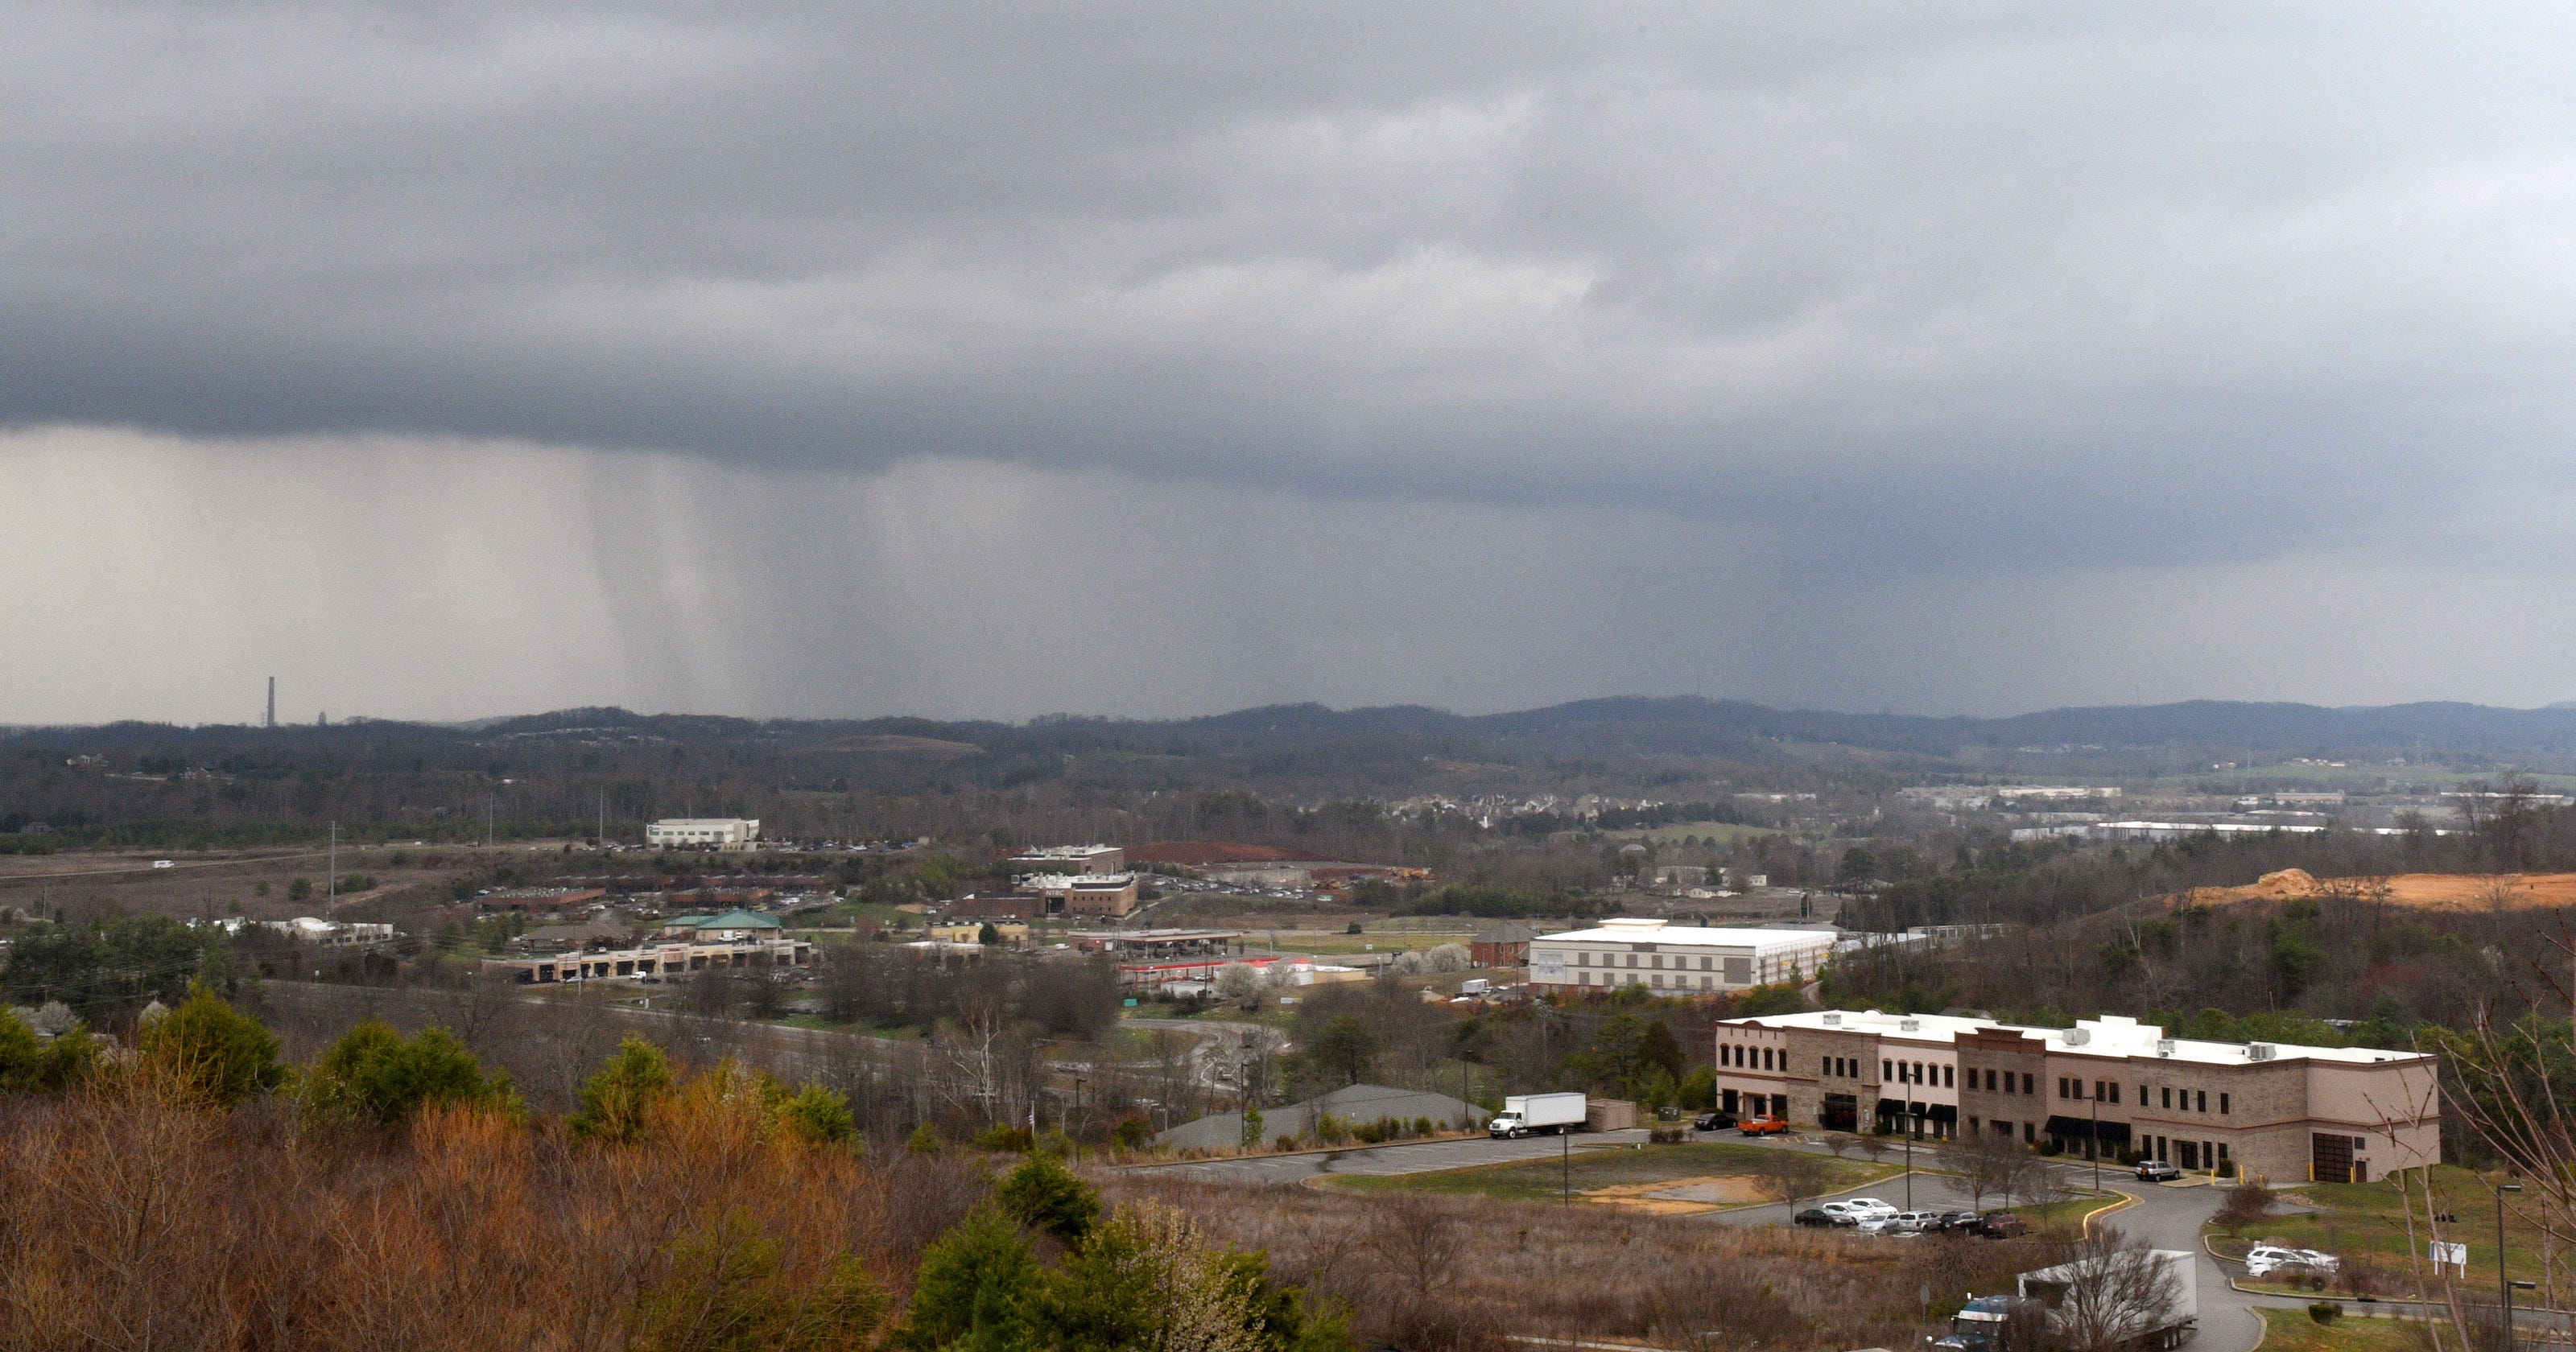 Knoxville weather Storms cause Friday power outage, KUB says